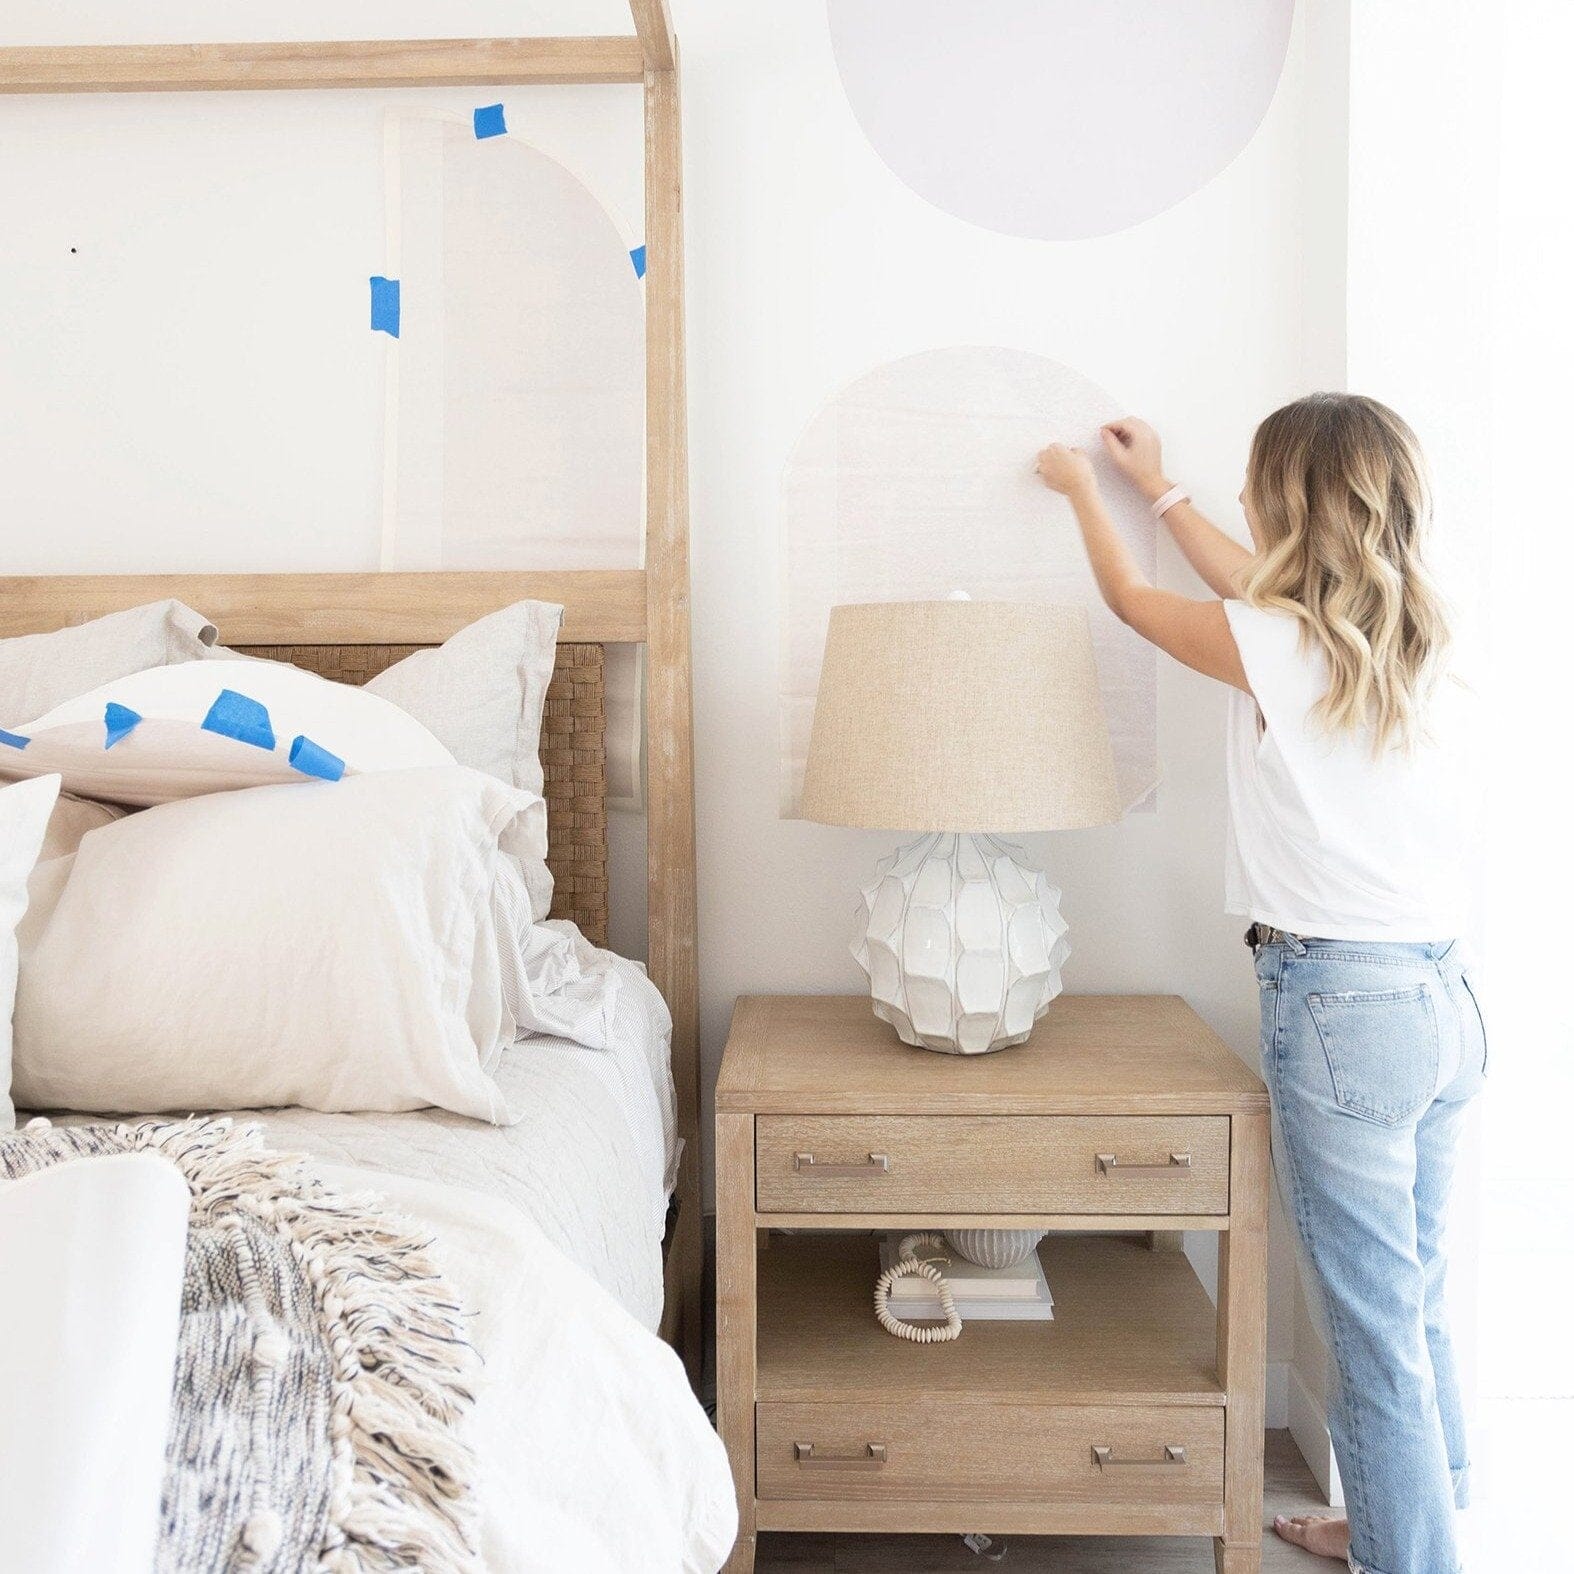 Shapes & Sizes Wall Decals